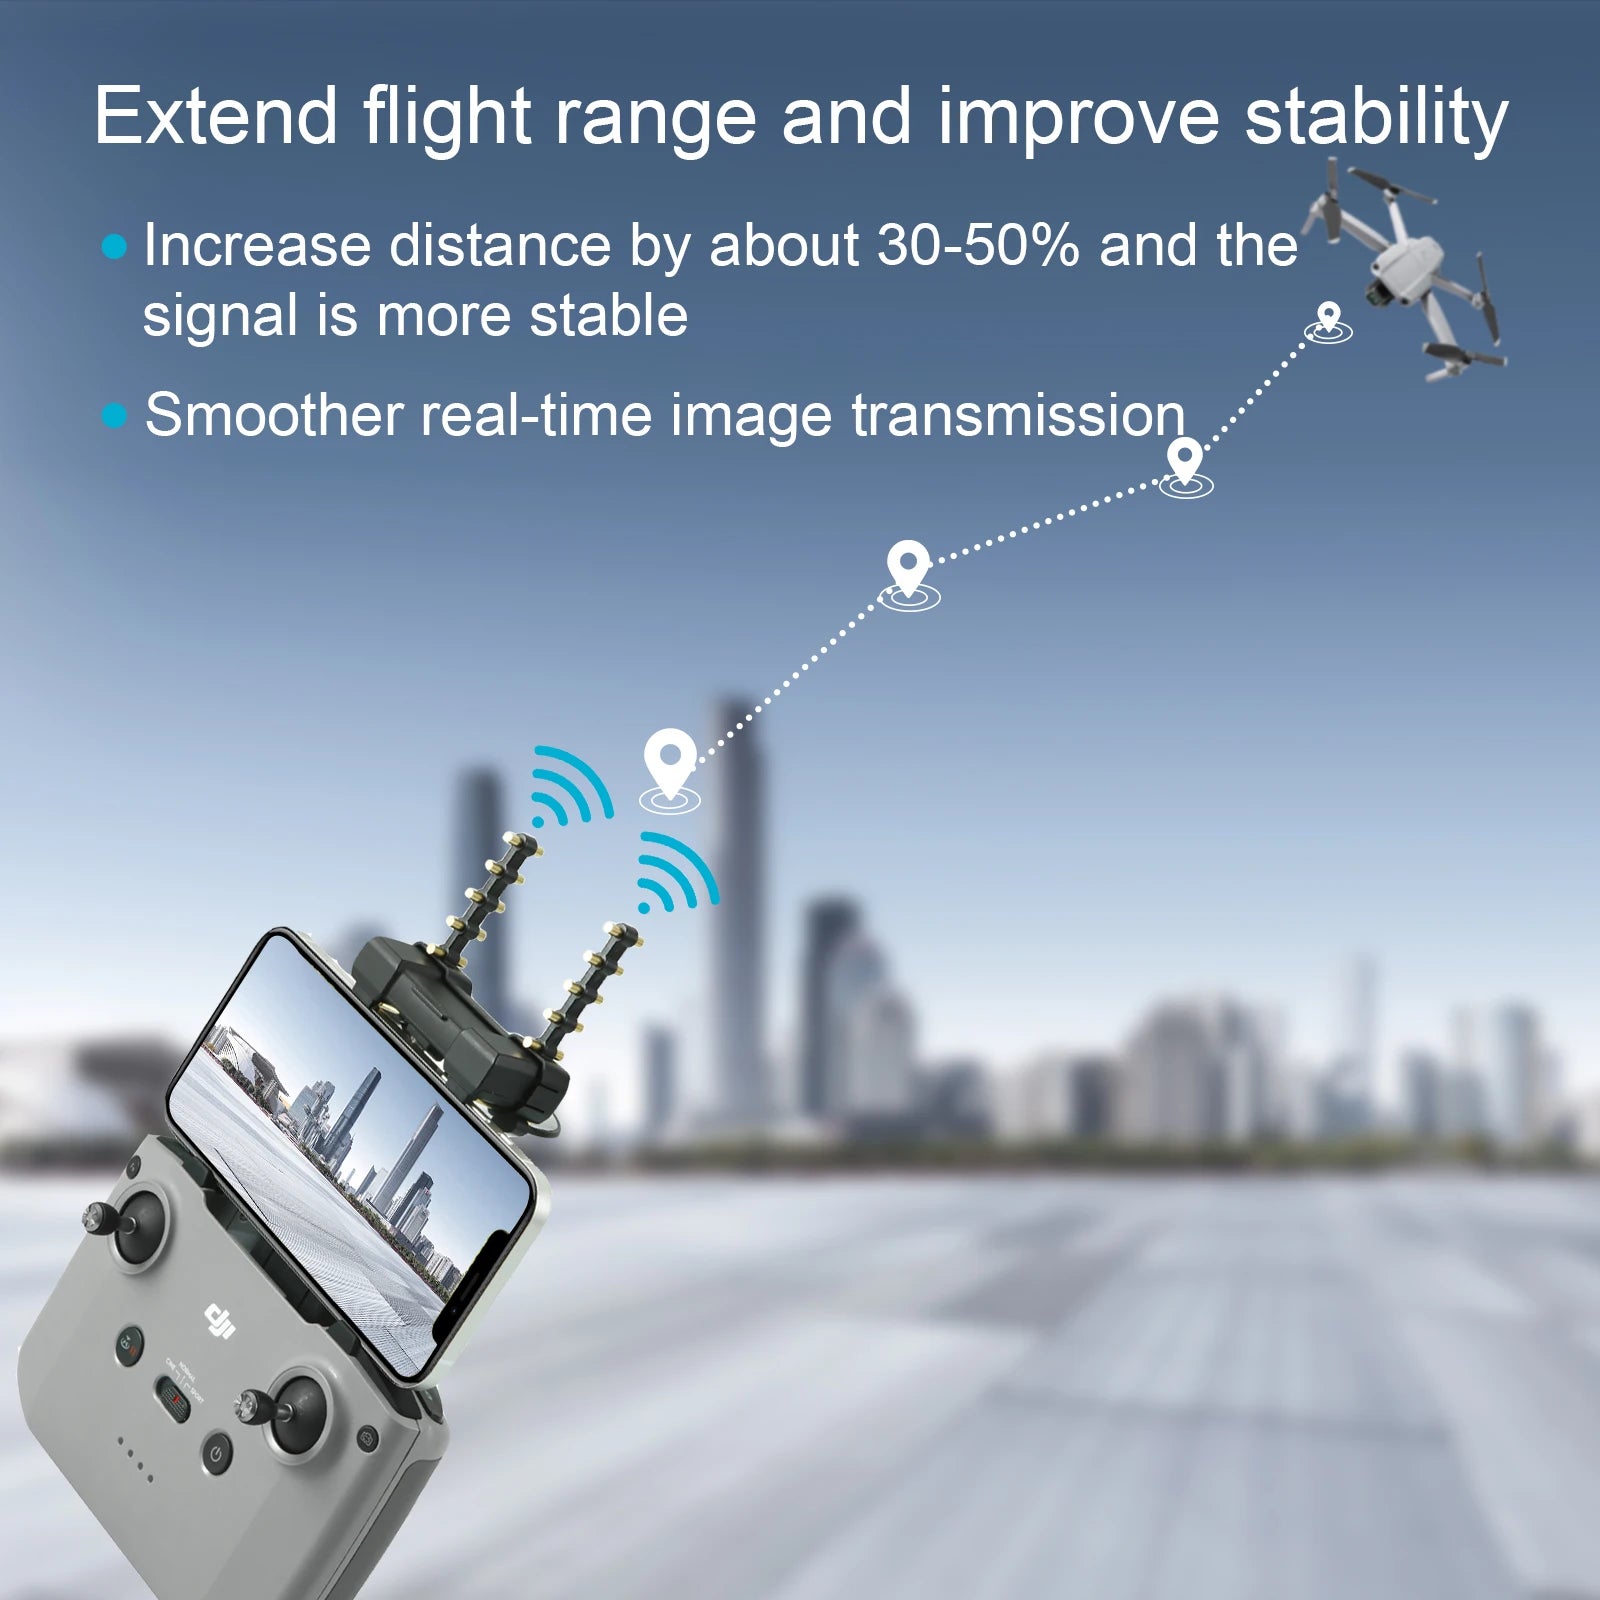 2 in 1 Antenna, extend flight range and improve stability Increase distance by about 30-50% and the signal is more stable